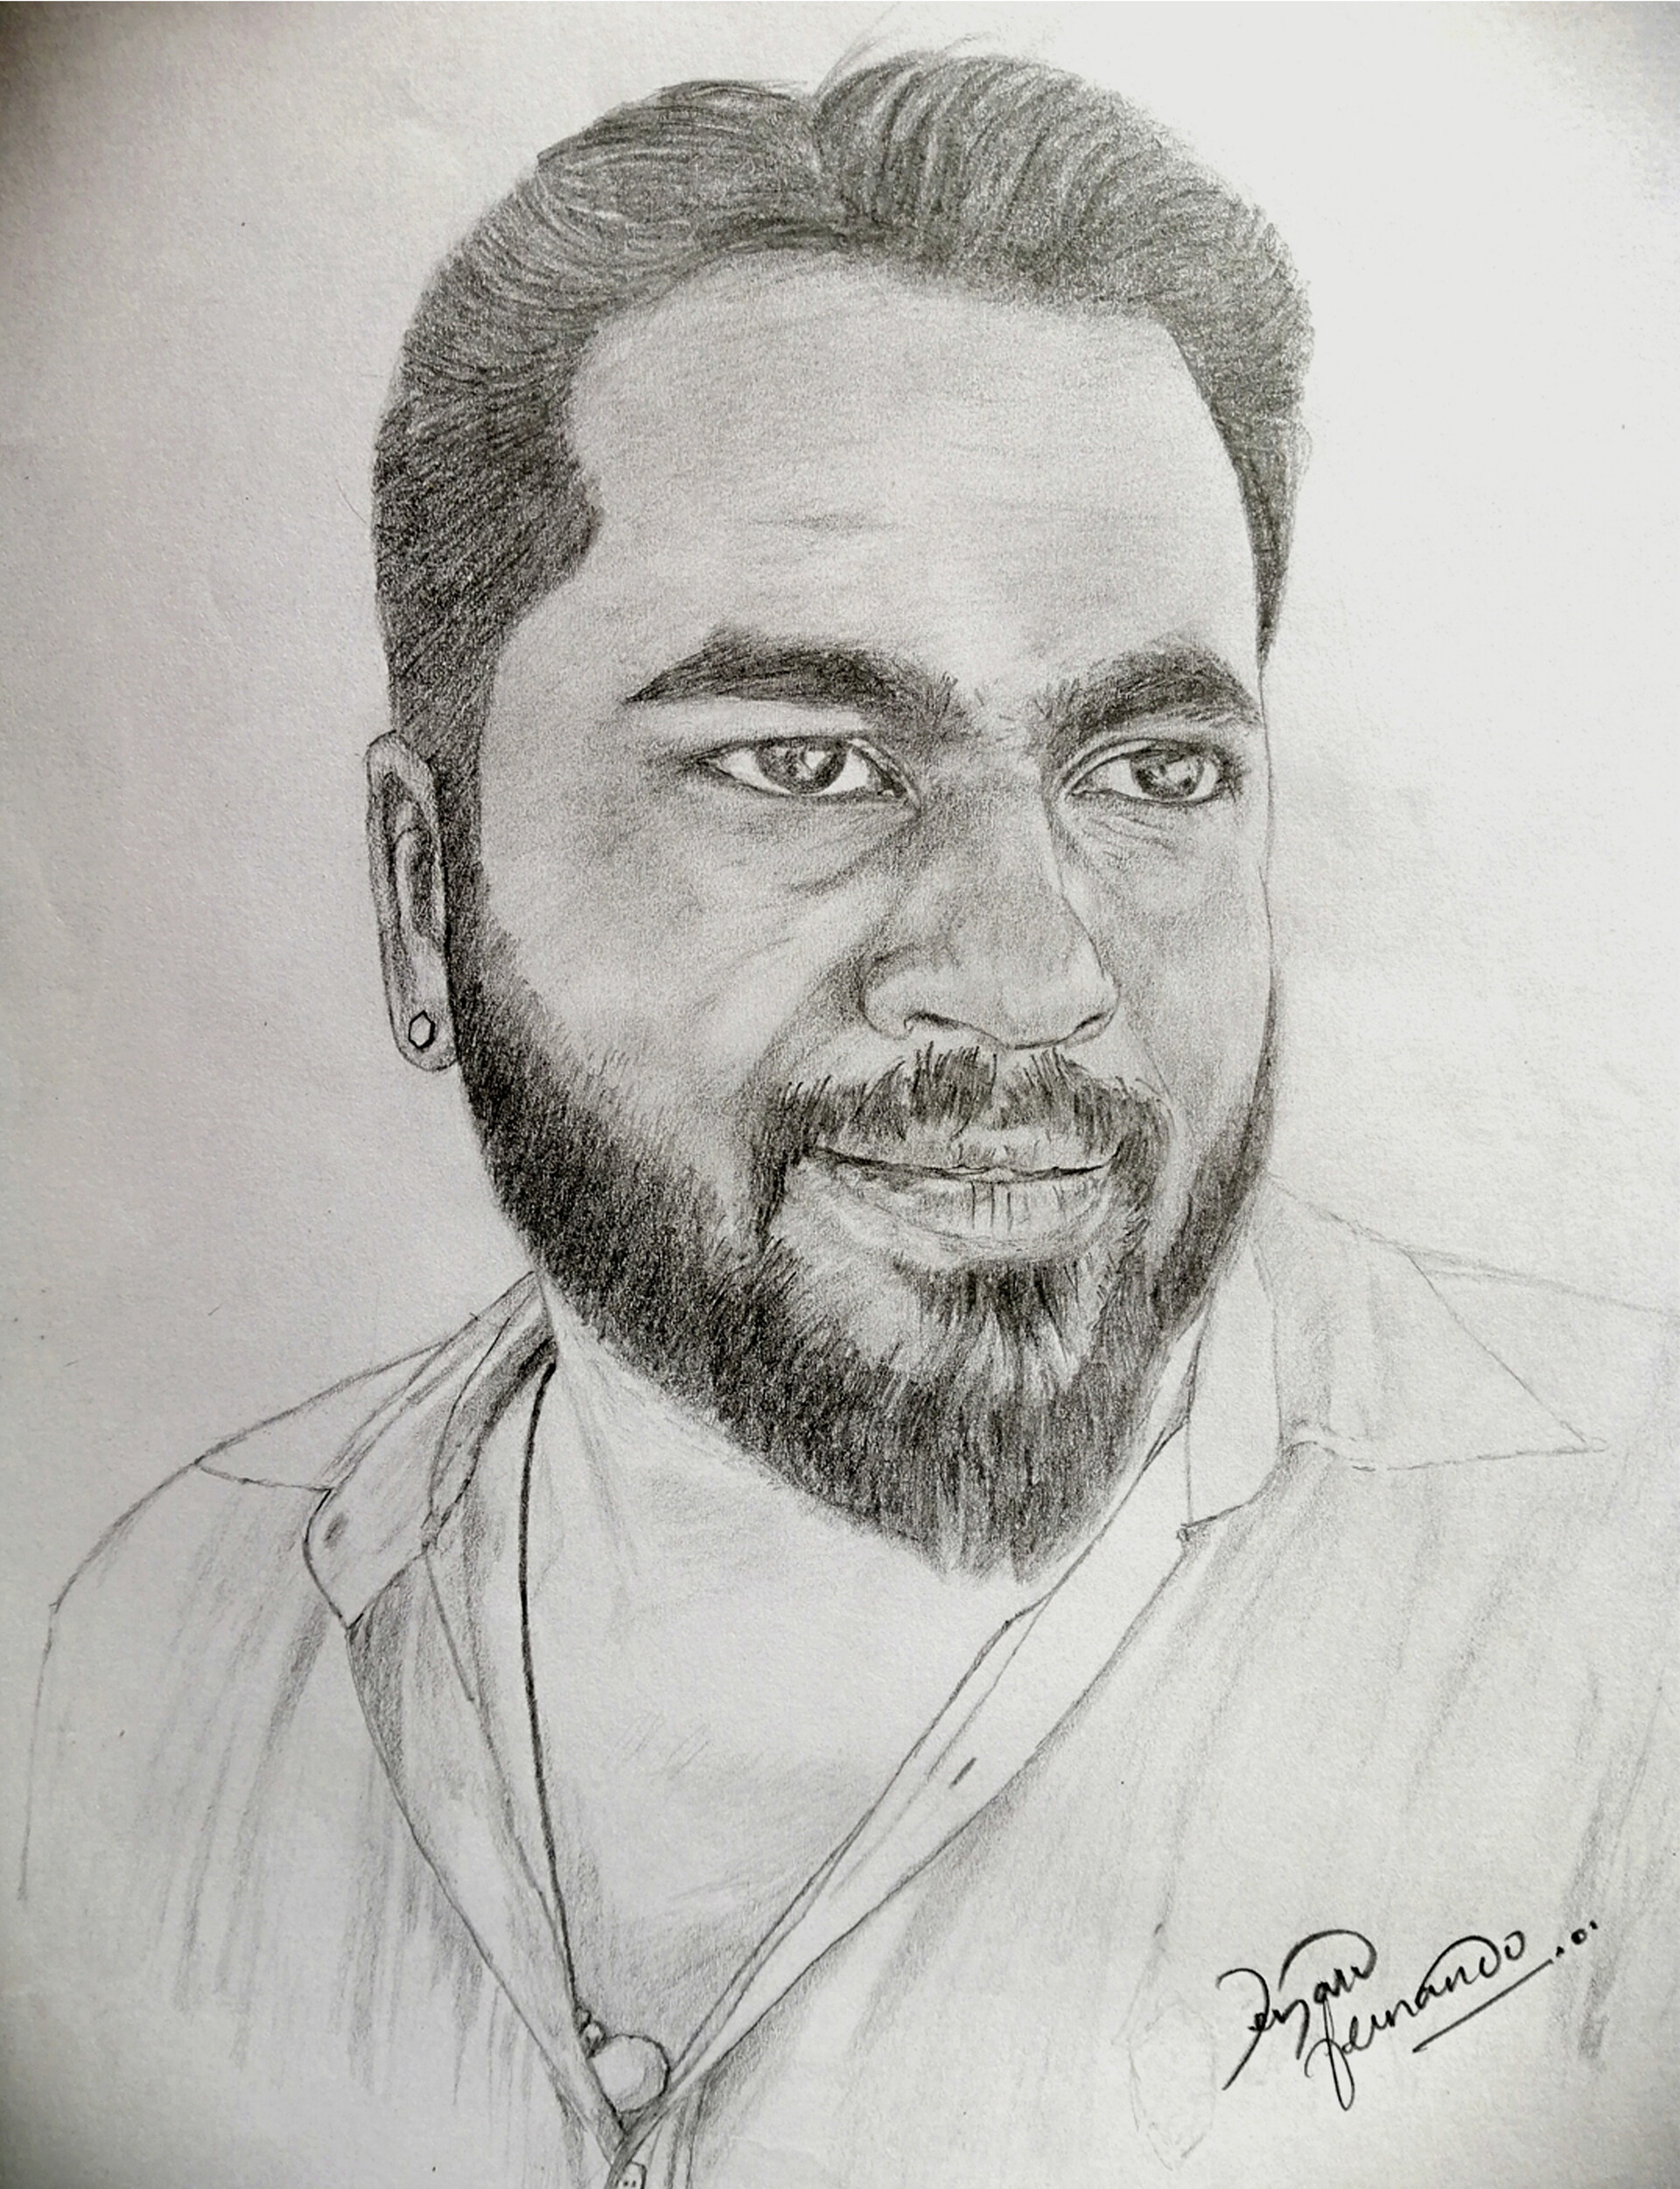 Malayalam Drawings for Sale - Pixels